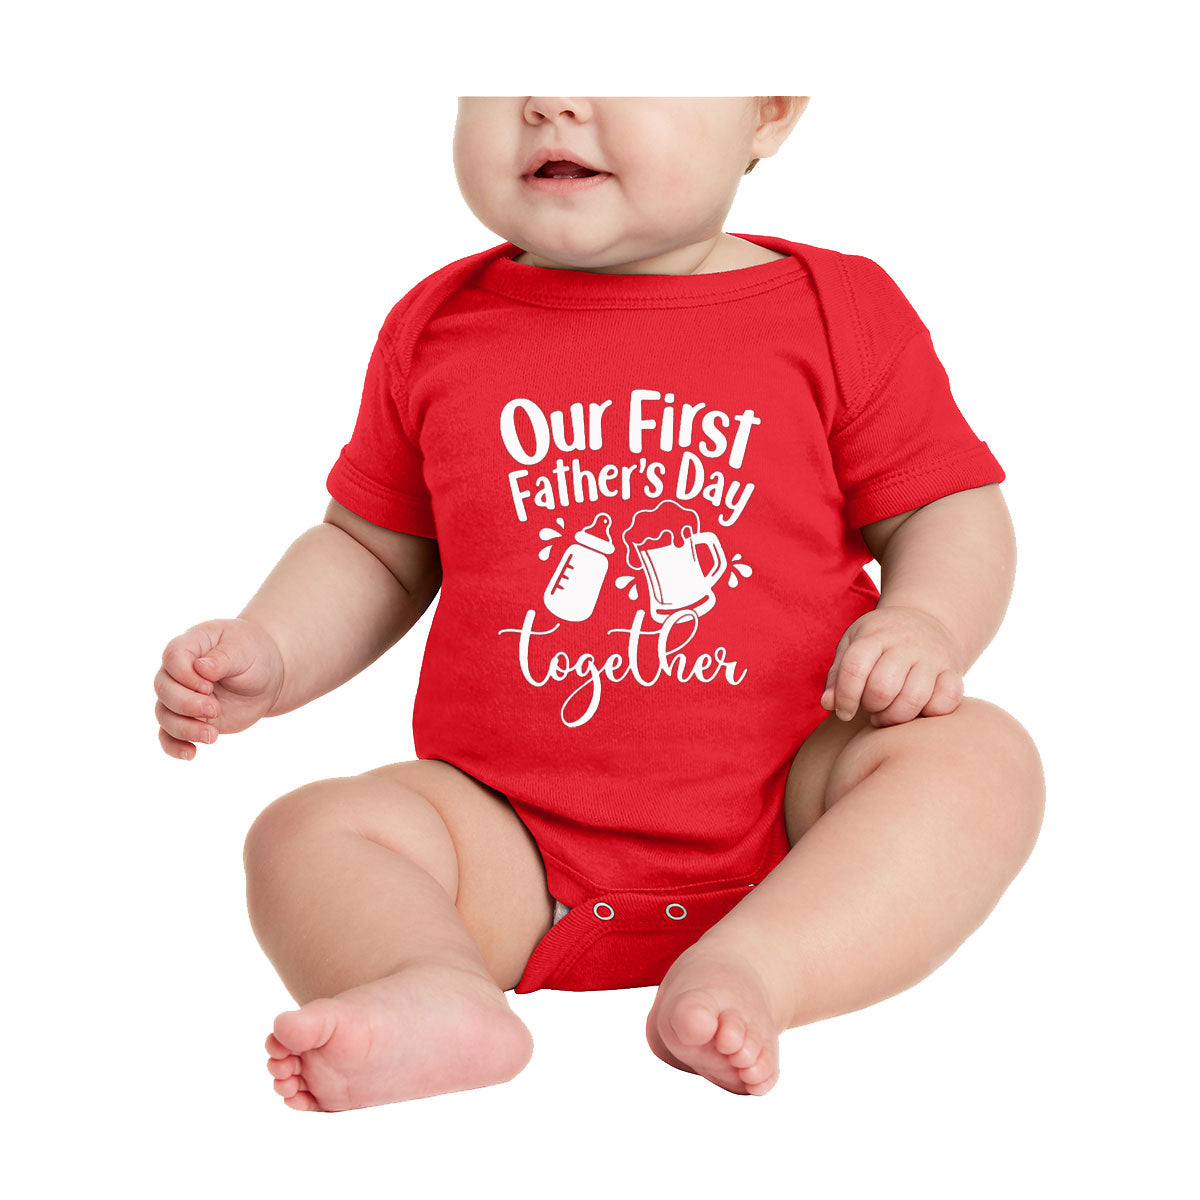 Our First Father's Day Together Baby Onesie